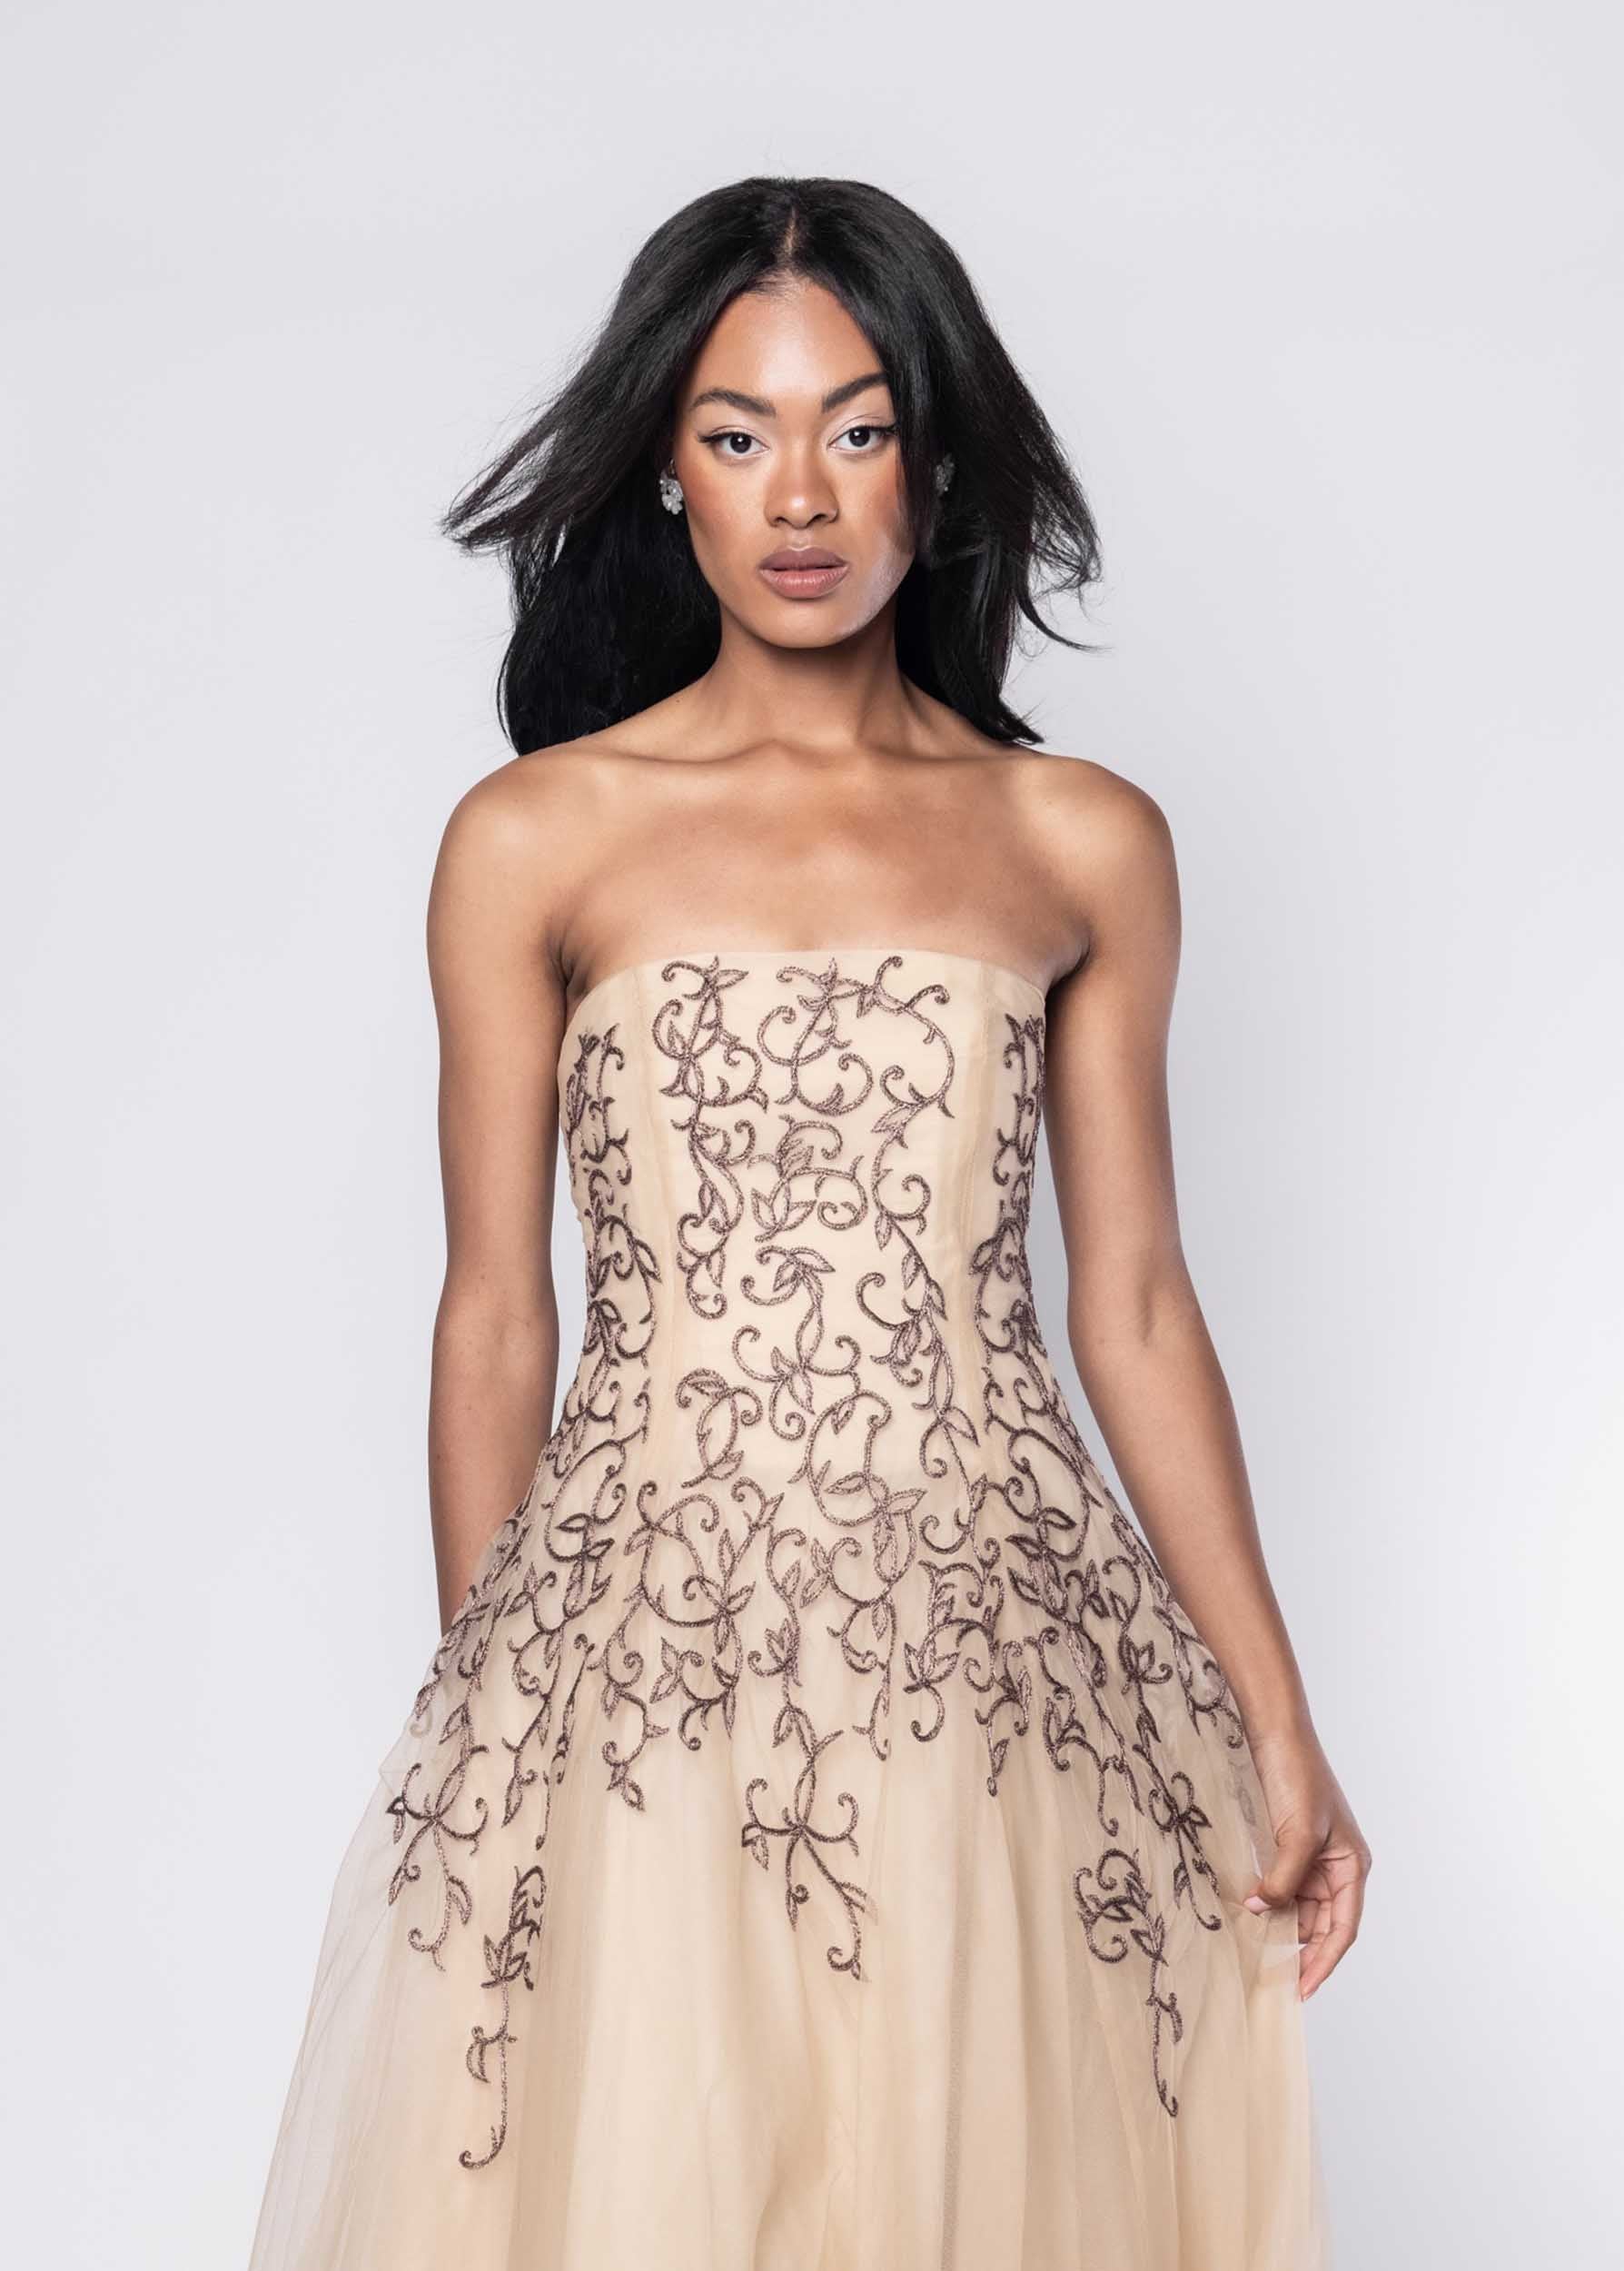 Beautiful model in nude Sujata Gazder cocktail dress with ornate stitching - close view